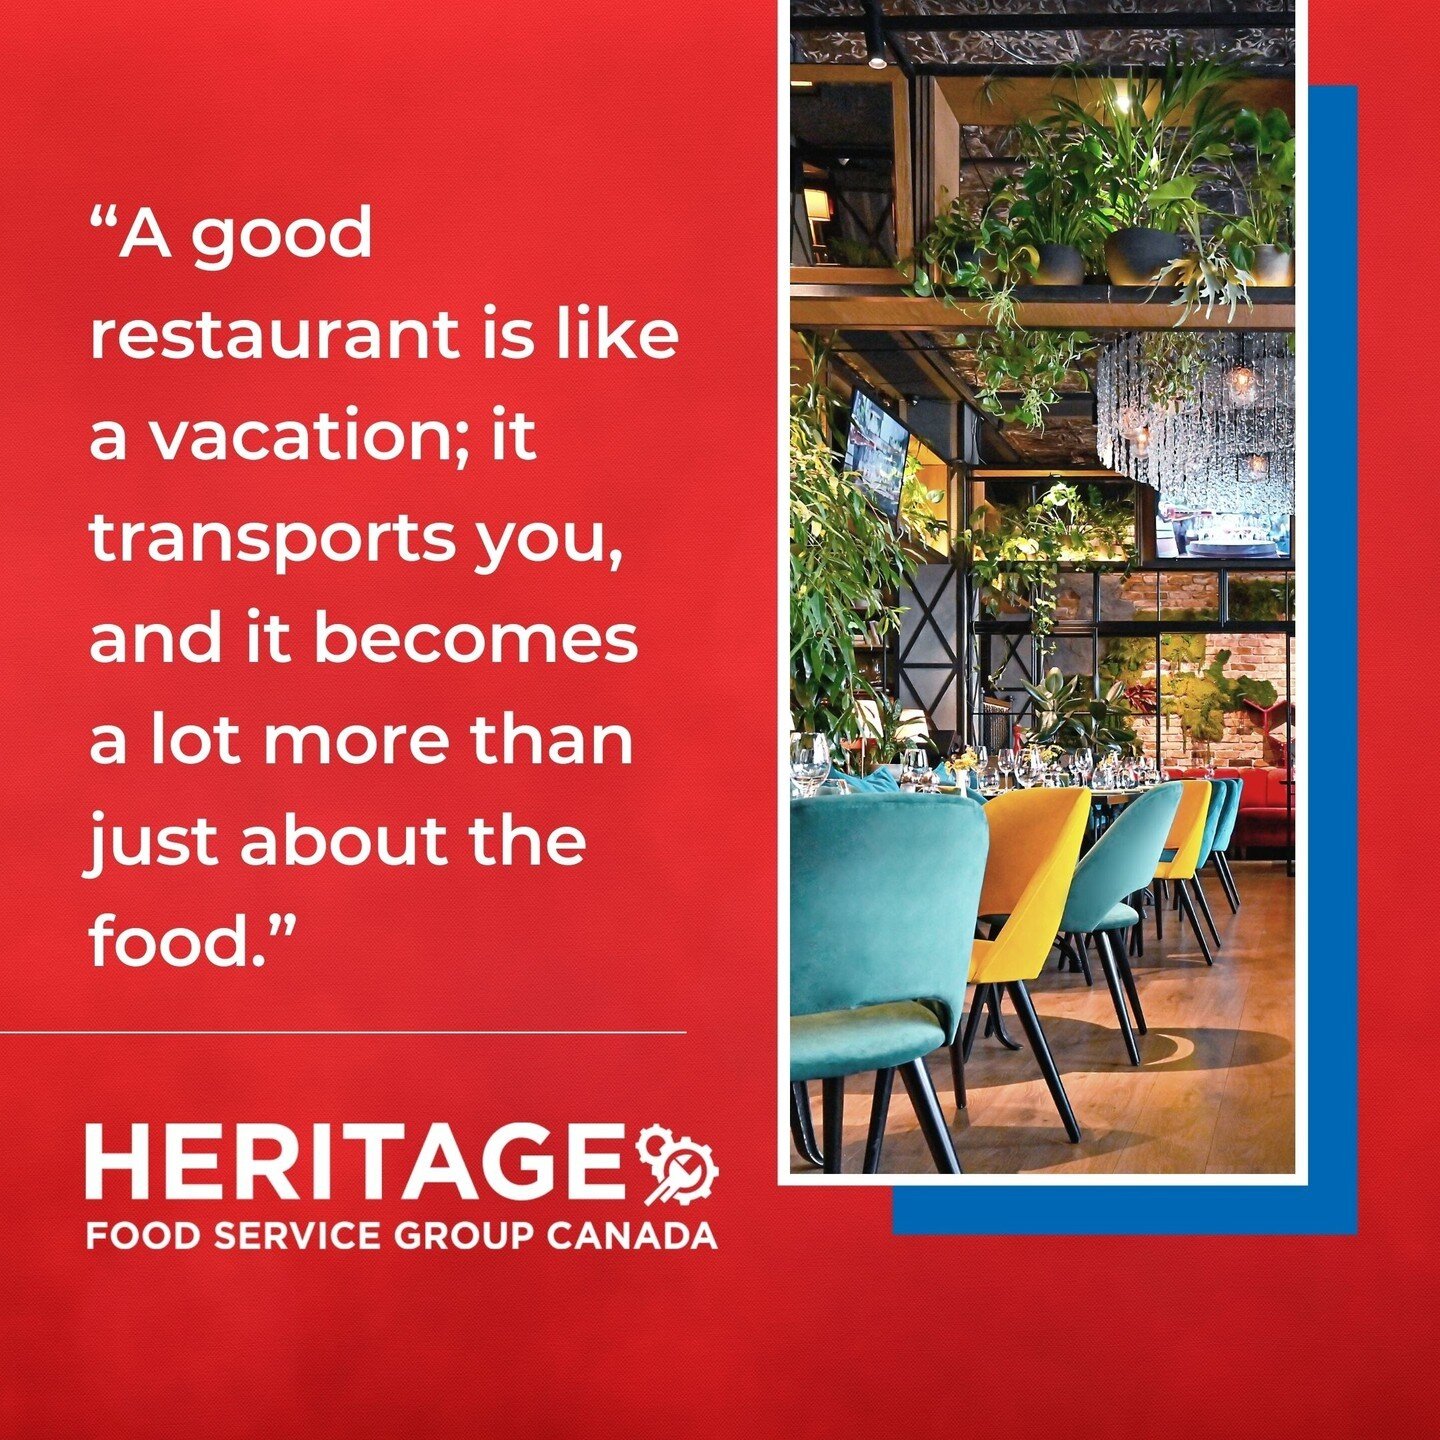 &ldquo;A good restaurant is like a vacation; it transports you, and it becomes a lot more than just about the food.&rdquo; - Philip Rosenthal